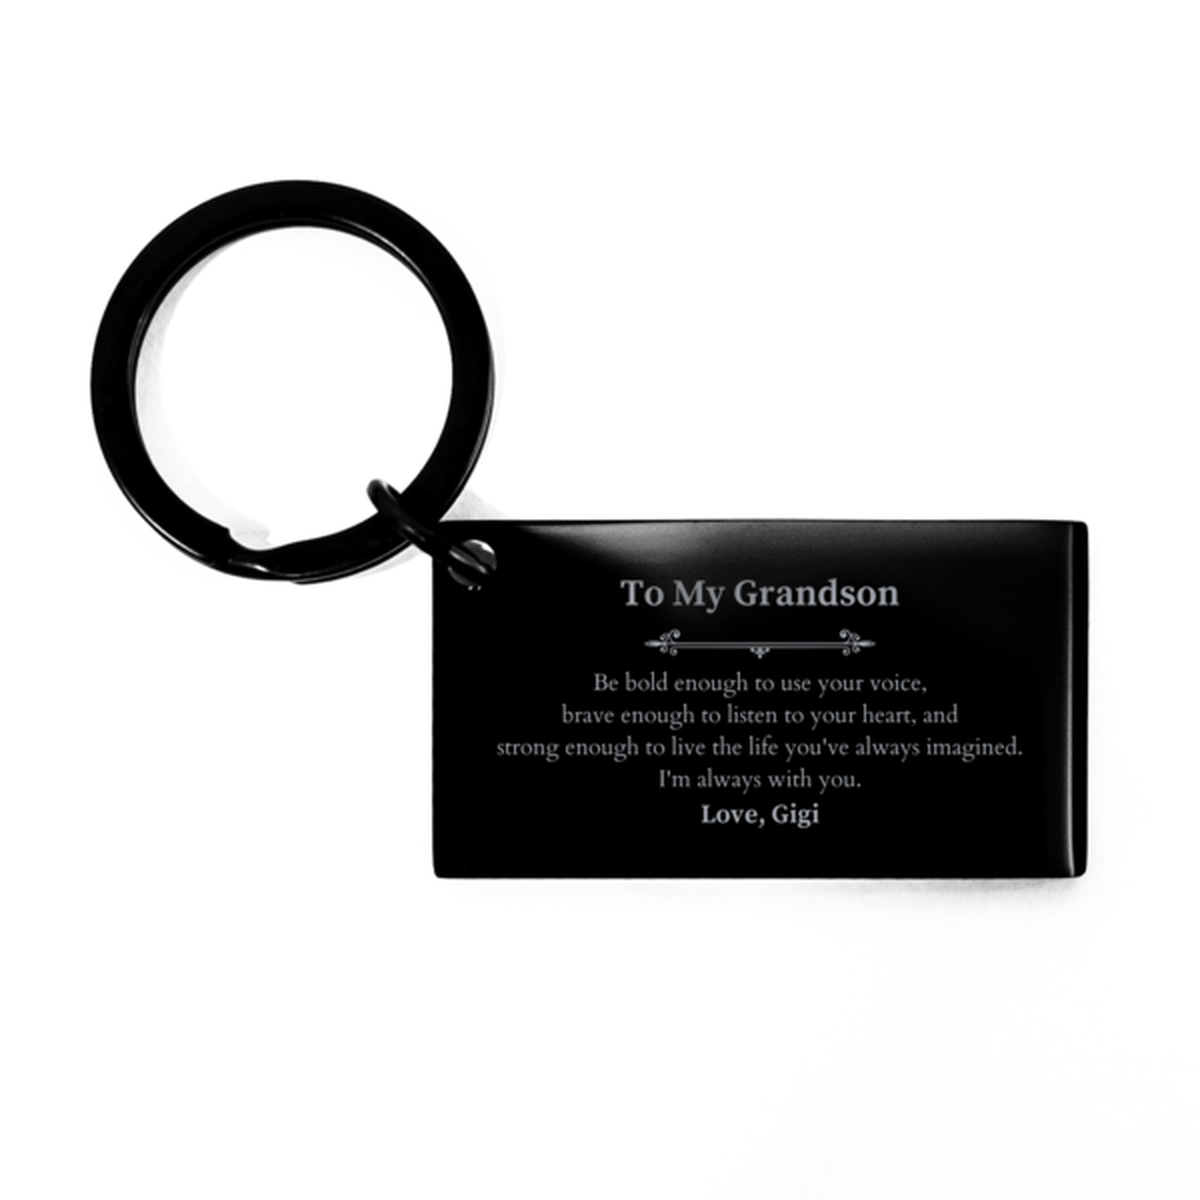 Keepsake Grandson Keychain Gift Idea Graduation Christmas Birthday Grandson from Gigi, Grandson Be bold enough to use your voice, brave enough to listen to your heart. Love, Gigi